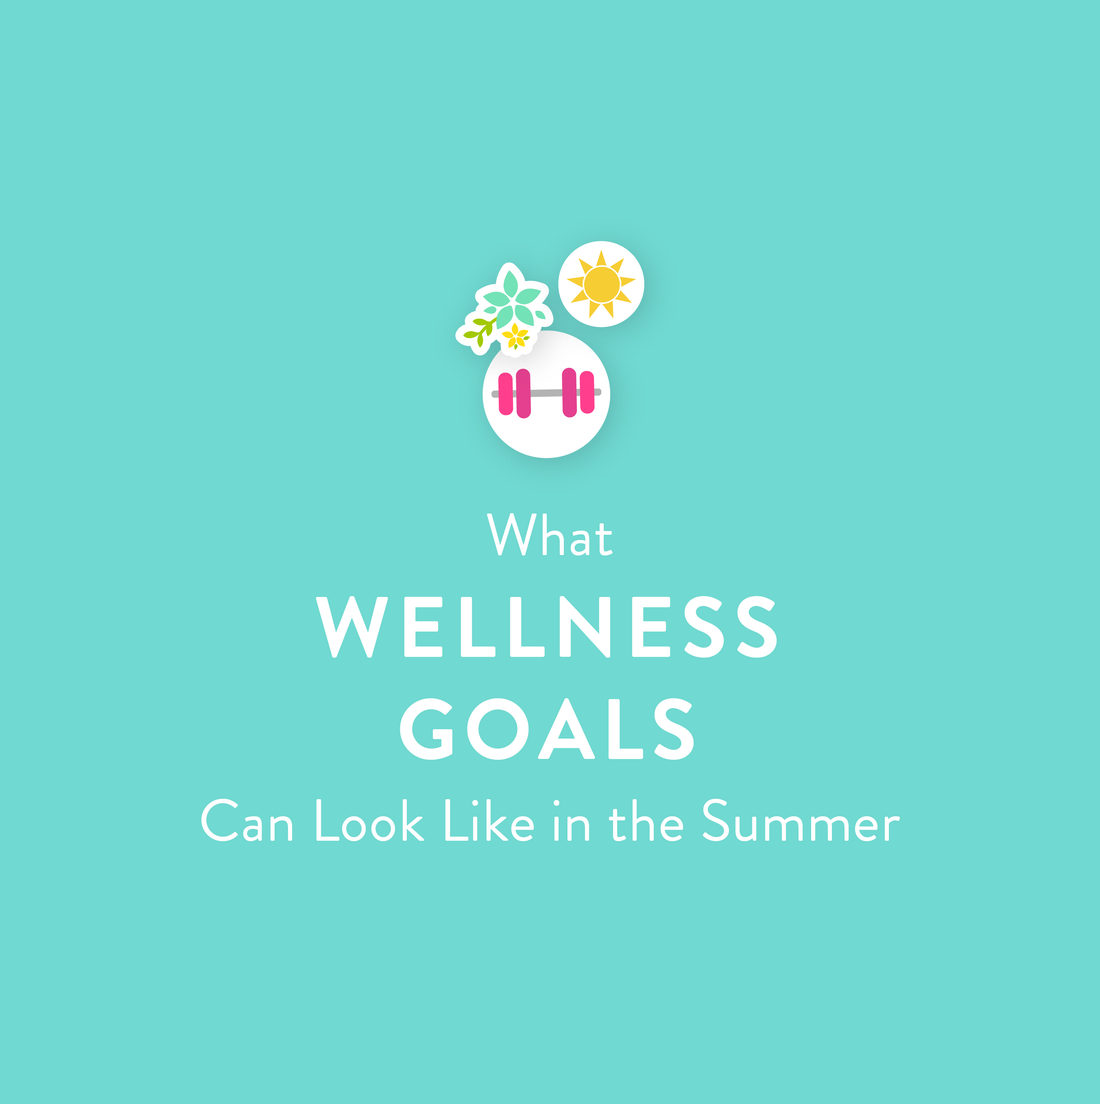 What Wellness Goals Can Look Like in the Summer